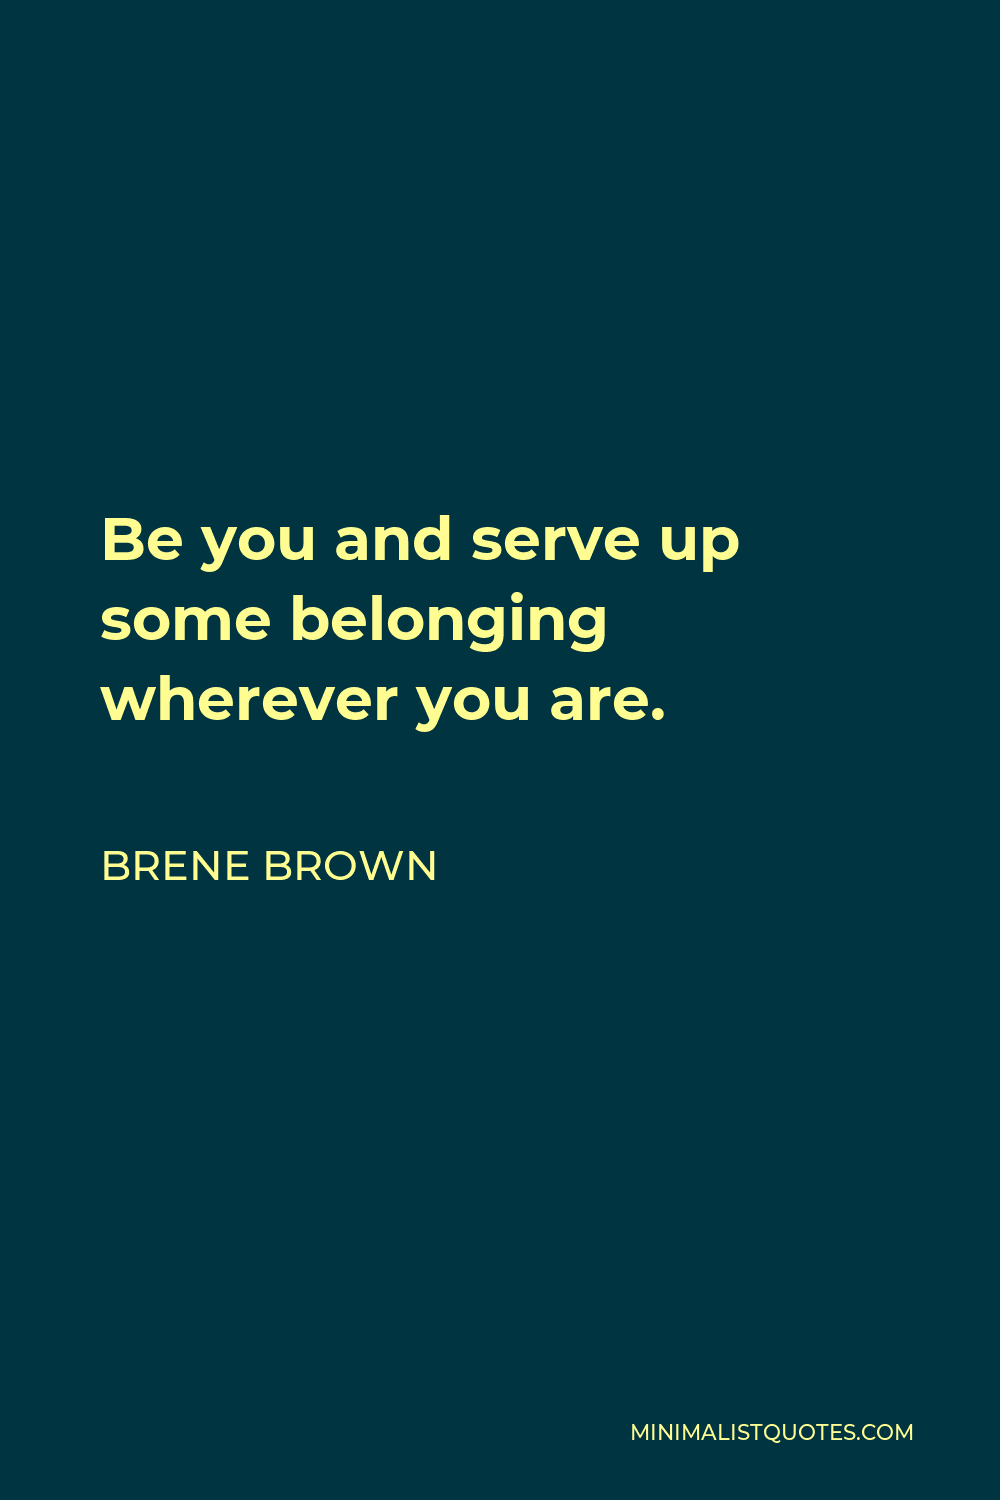 Brene Brown Quote - Be you and serve up some belonging wherever you are.